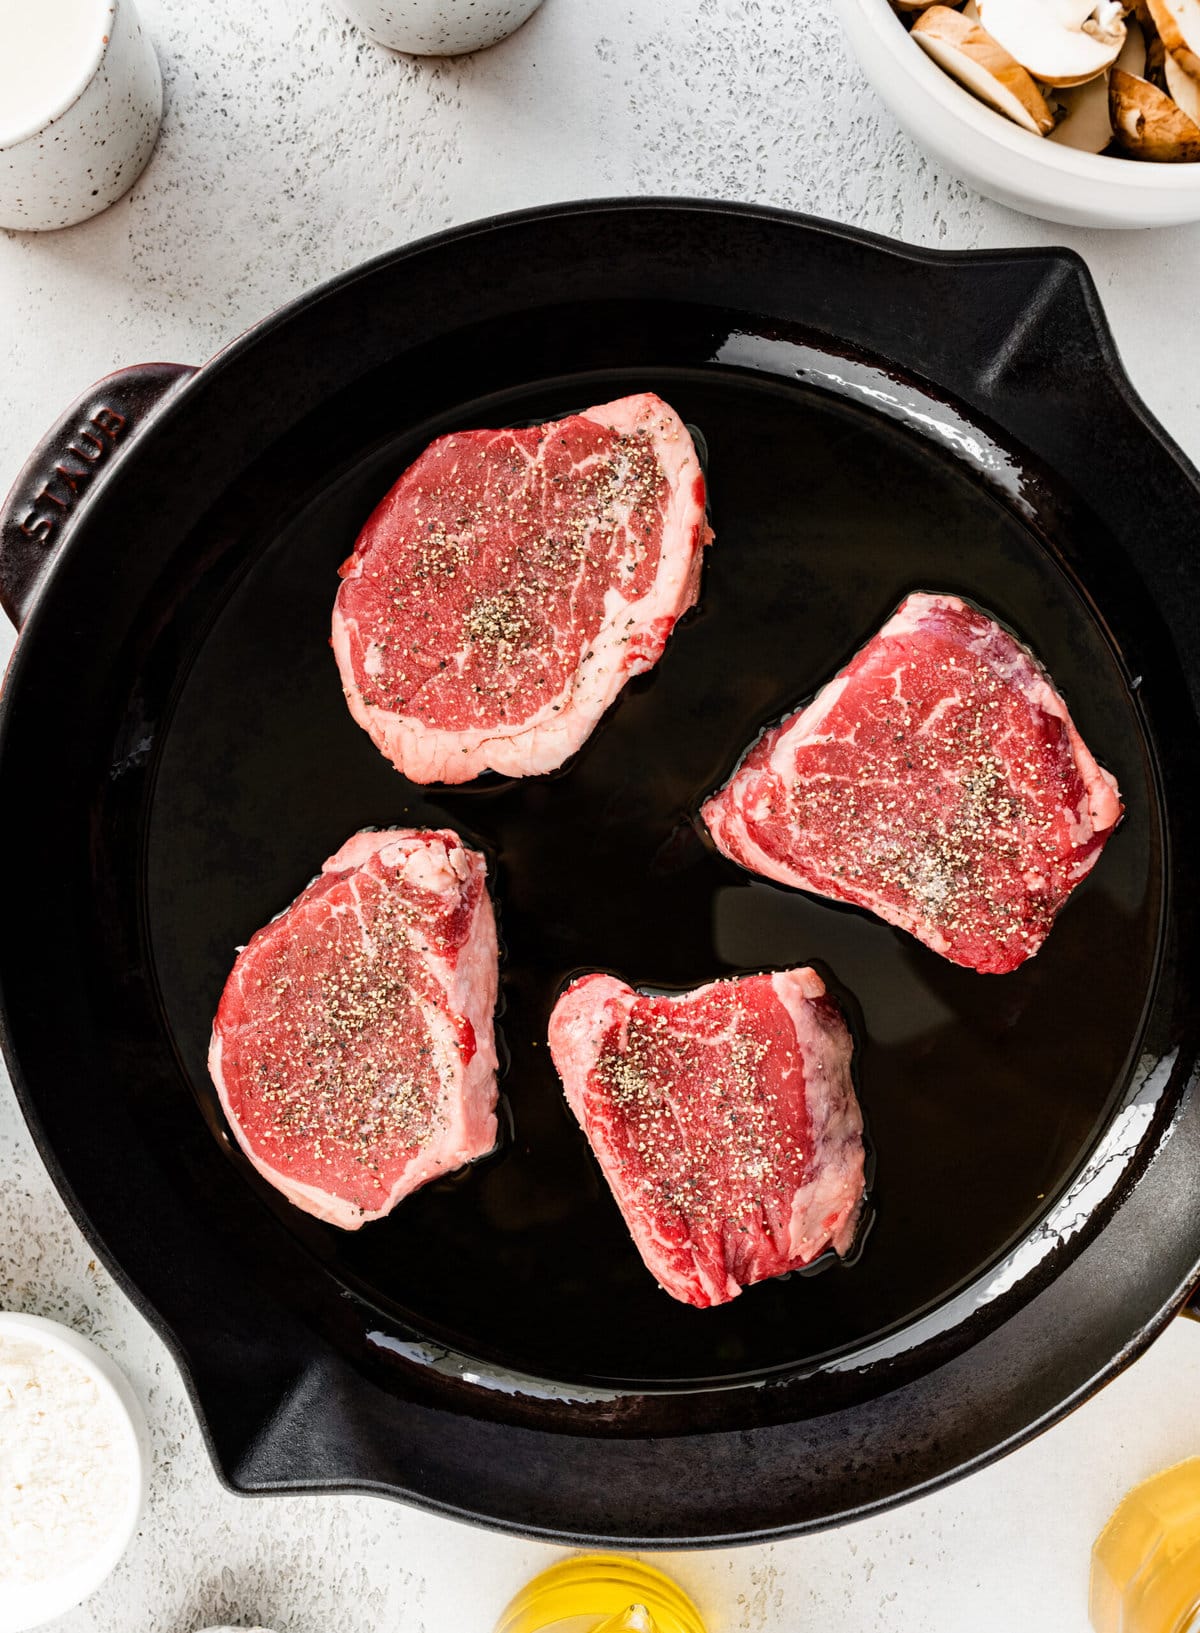 How to make best Steak Marsala recipe step-by-step: sear the steak in hot pan on both sides.